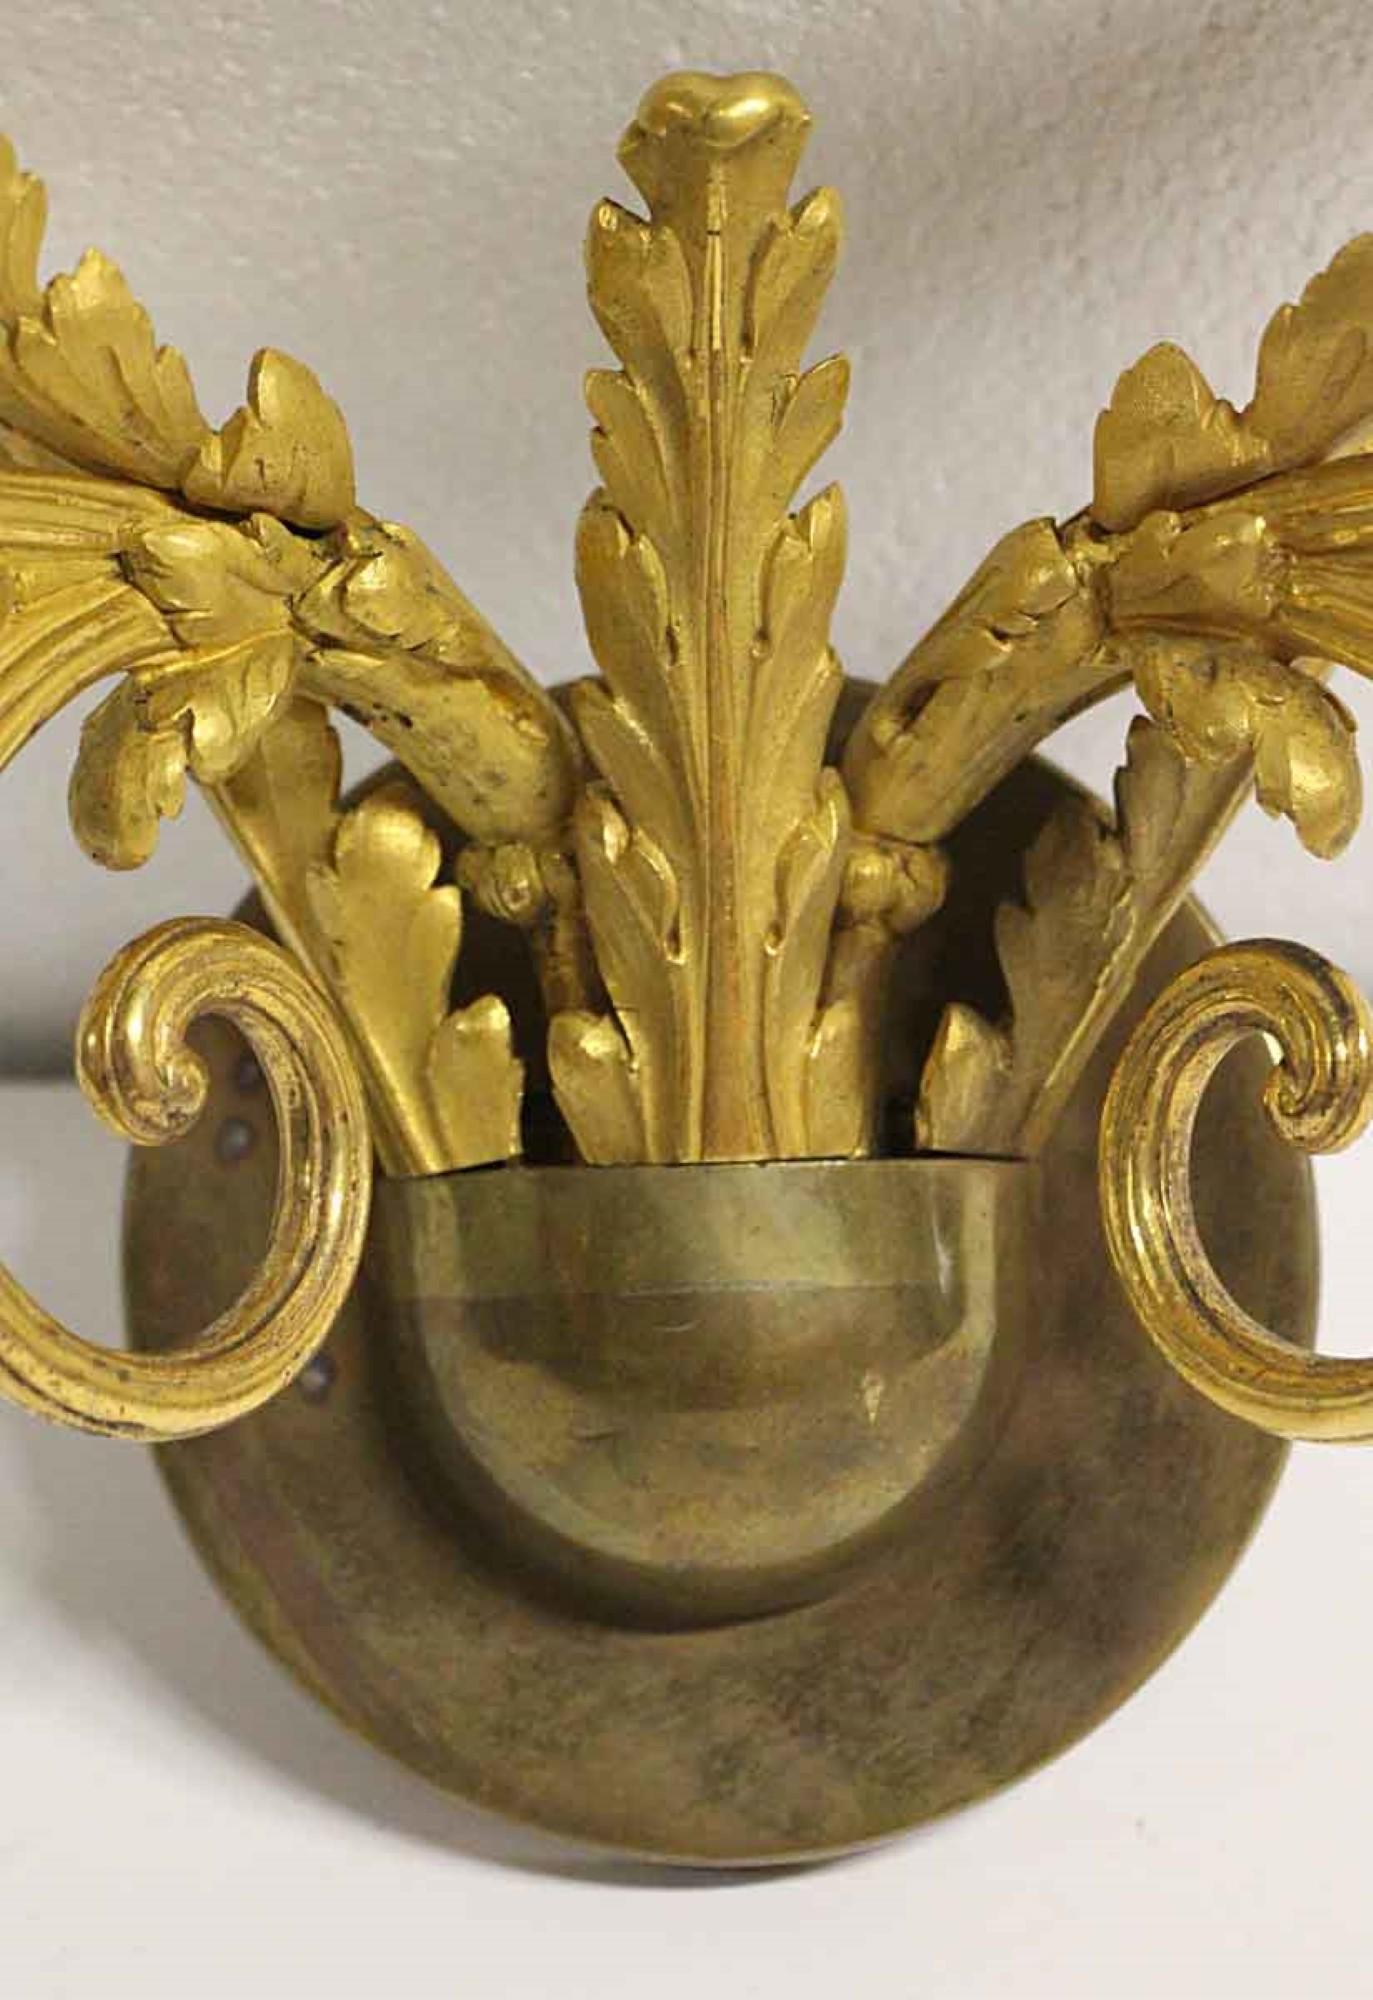 1910s French Empire Wall Cast Brass with Gold Filigree, Quantity Available 2